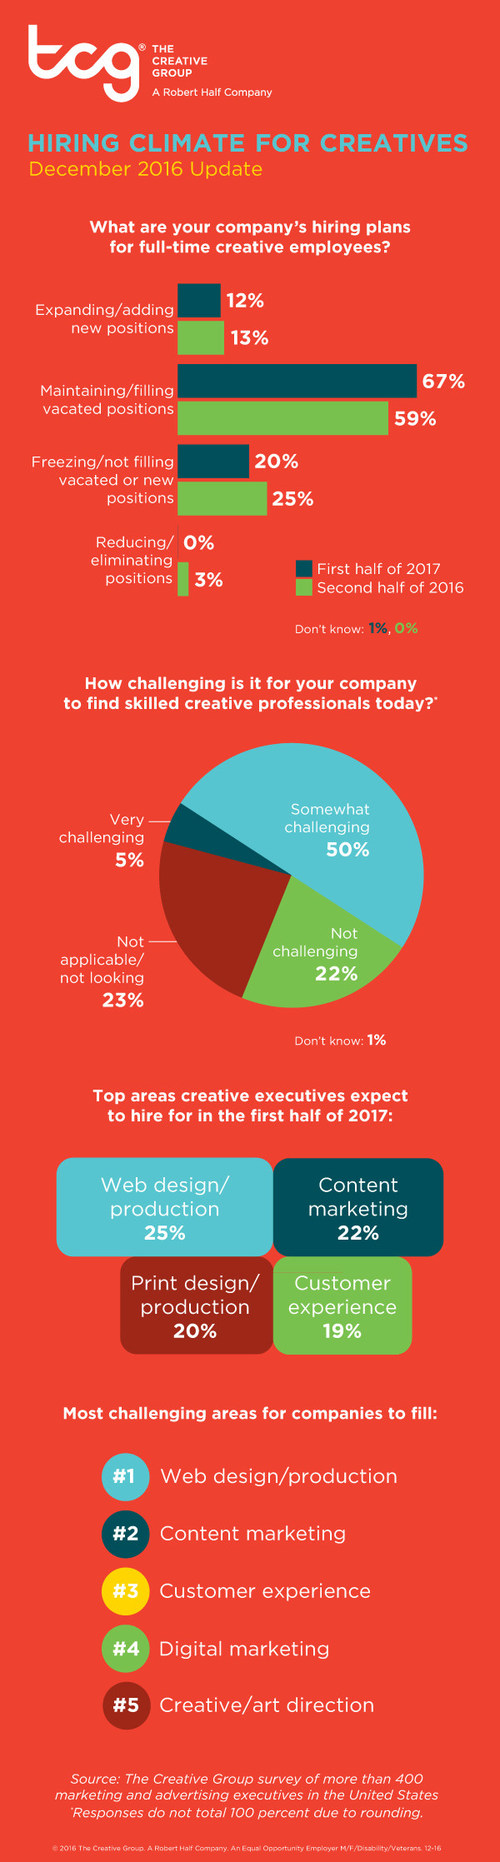 Research from The Creative Group reveals U.S. advertising and marketing executives' hiring plans for first half of 2017